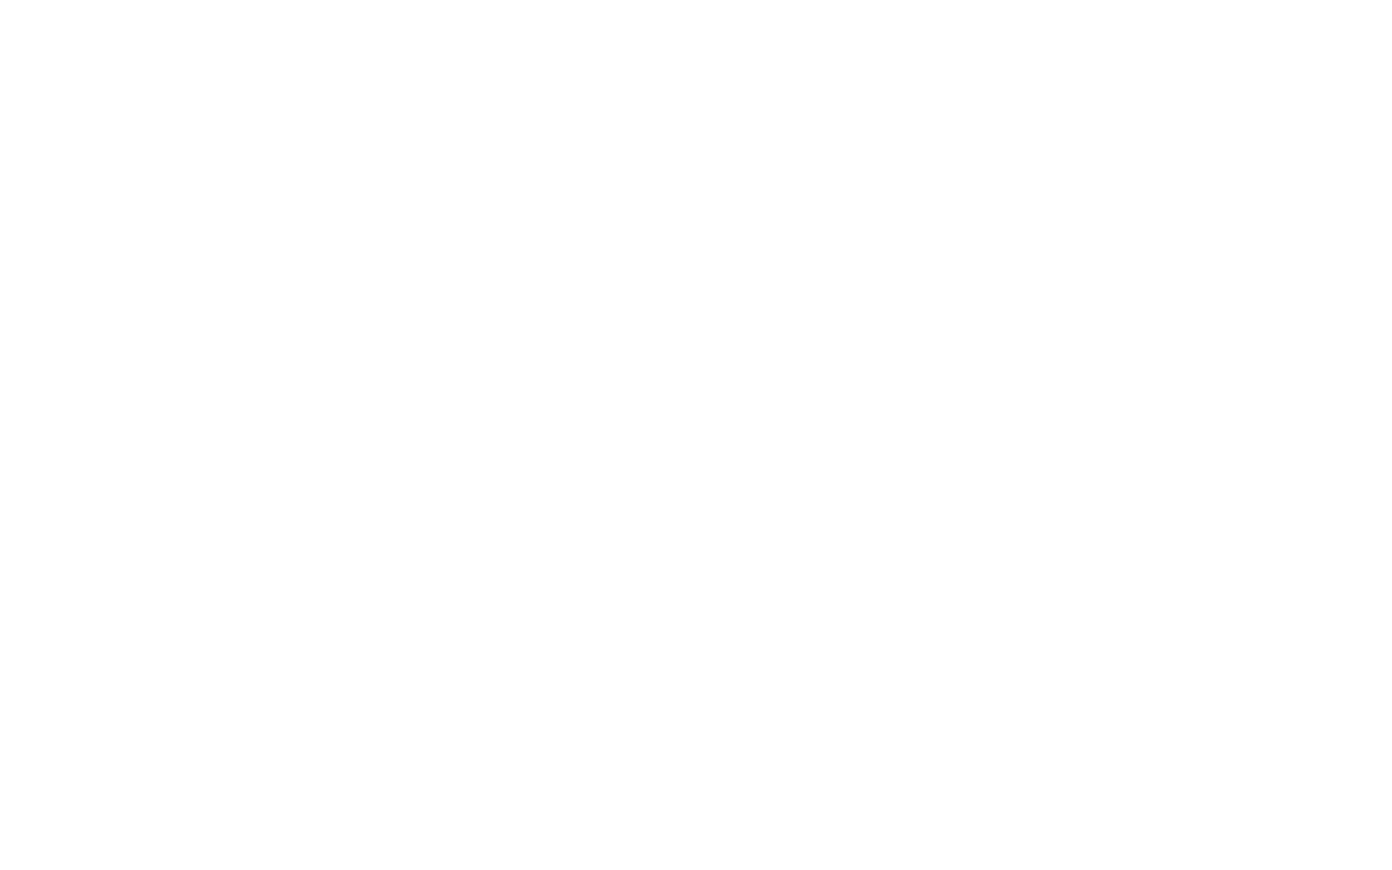 Careers at South River Mortgage